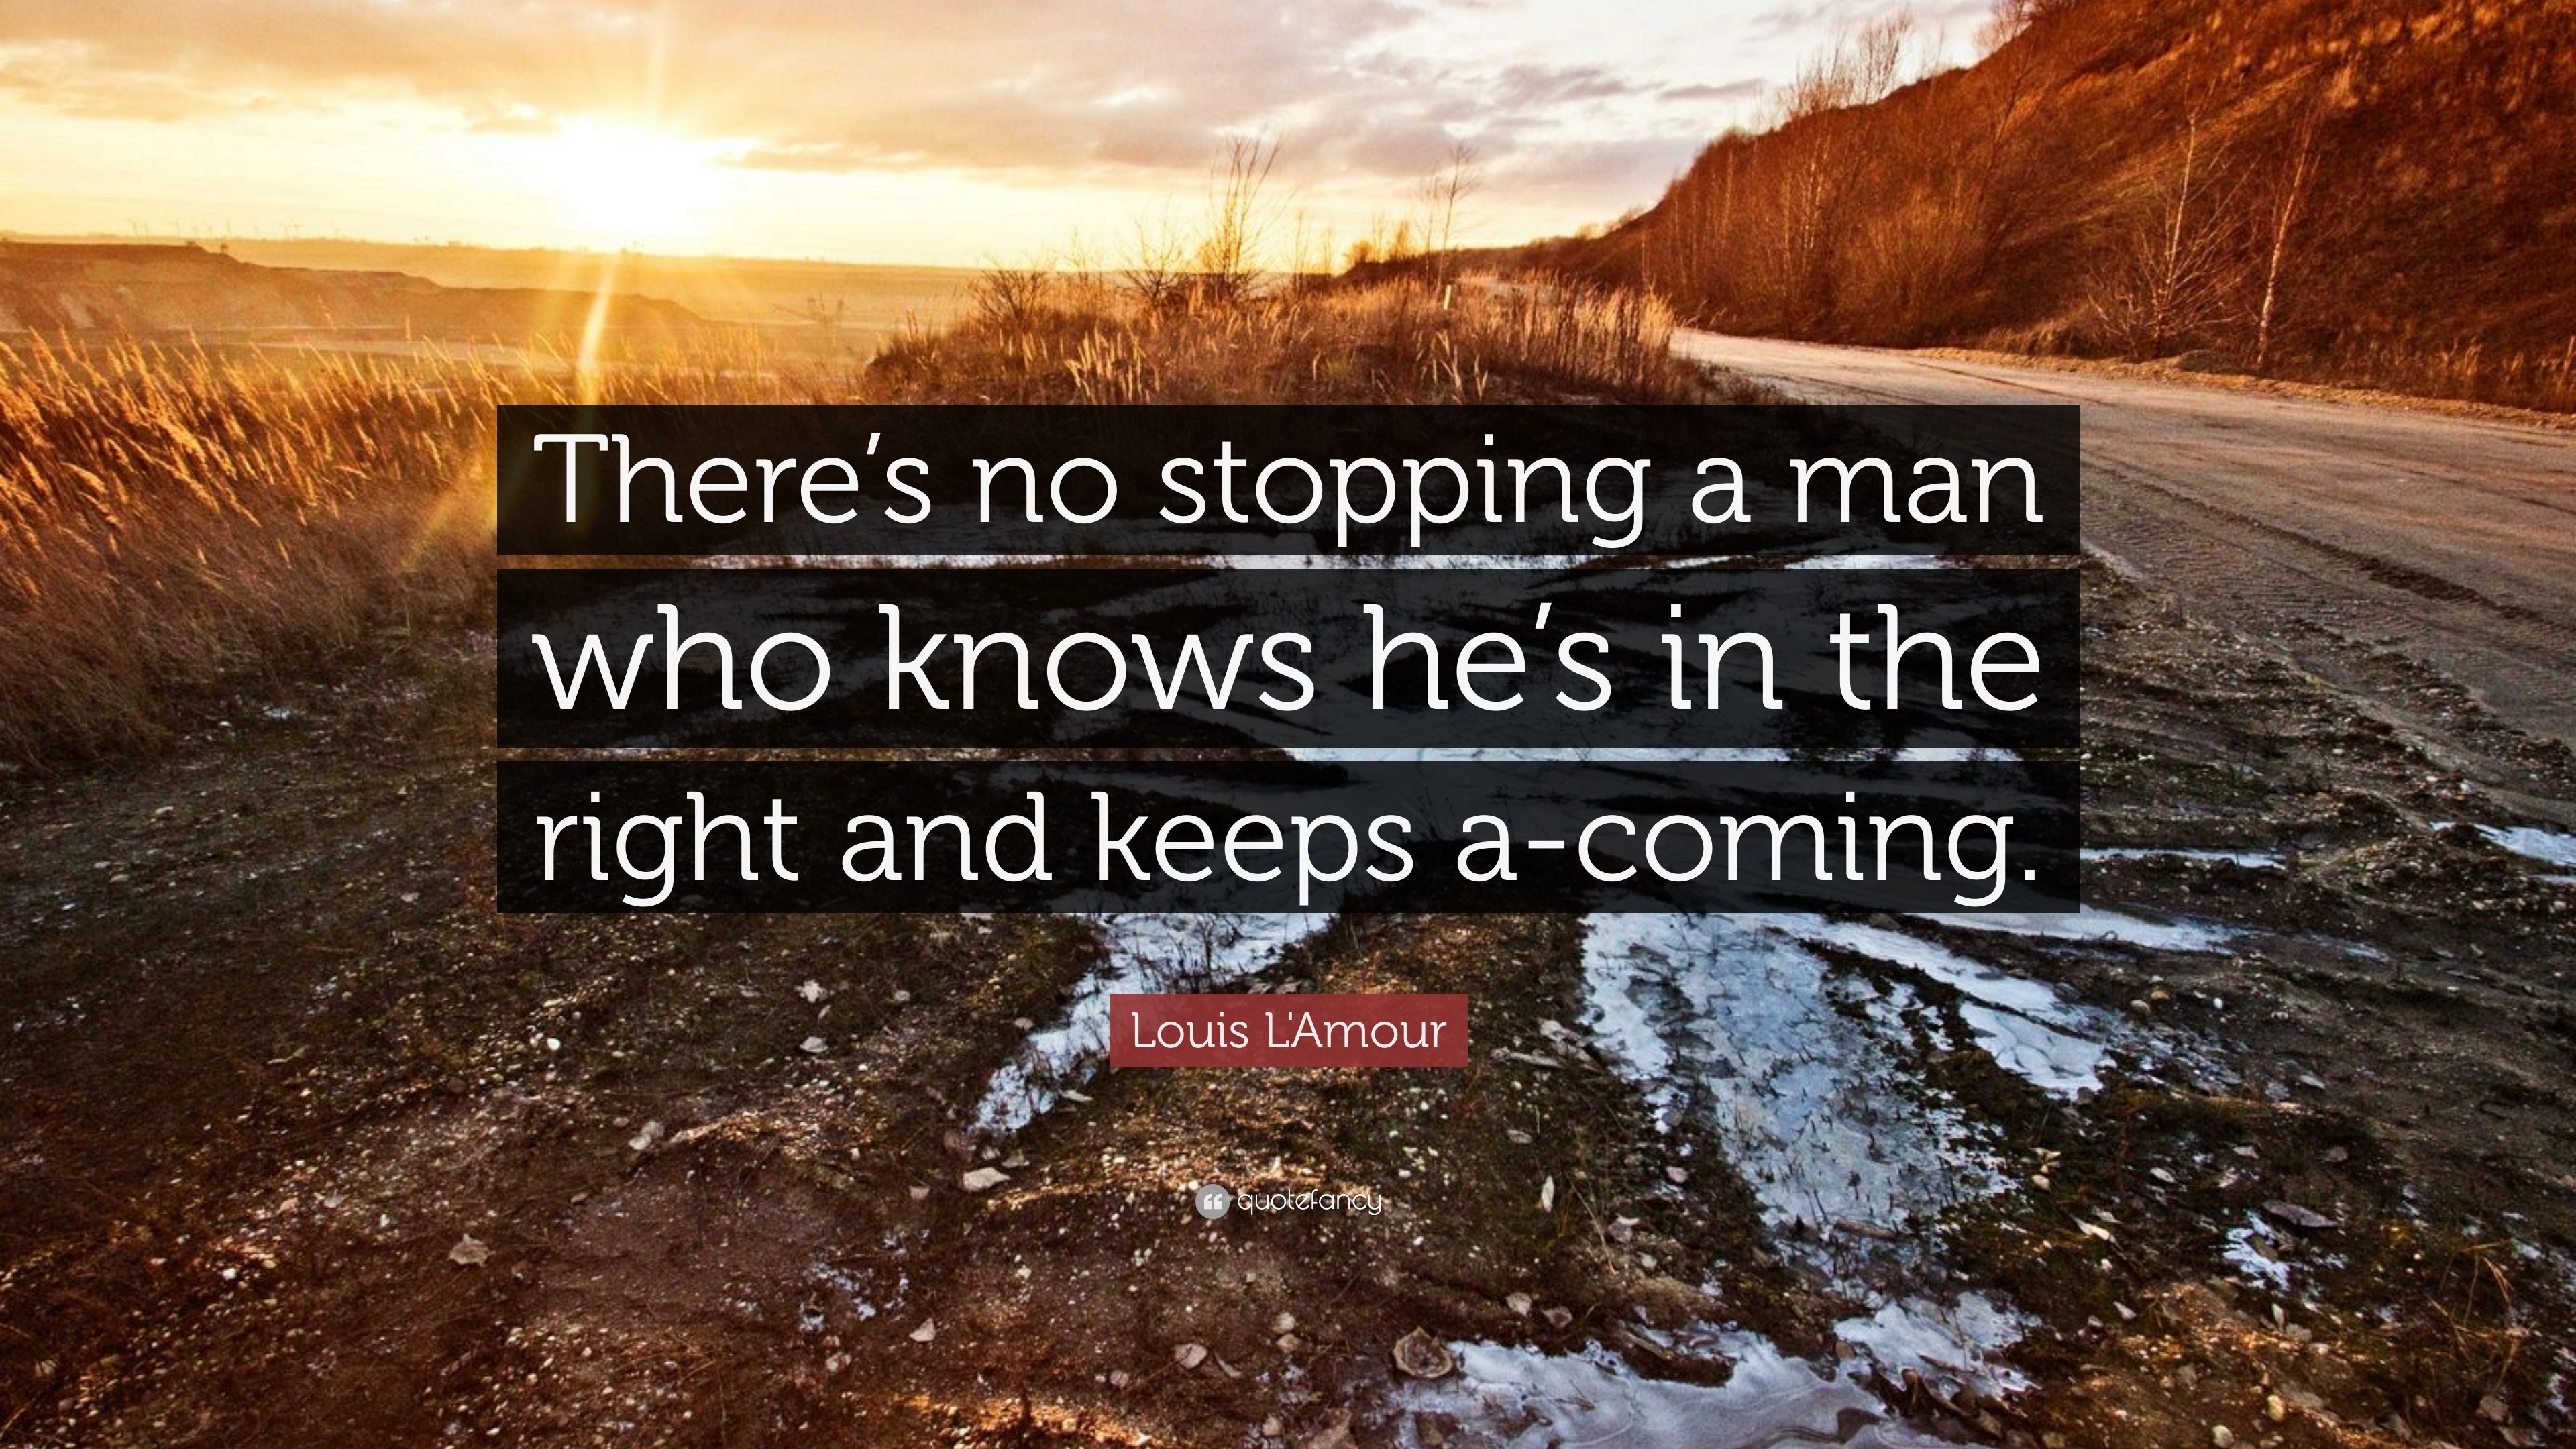 Louis L&#39;Amour Quote: “There’s no stopping a man who knows he’s in the right and keeps a-coming ...